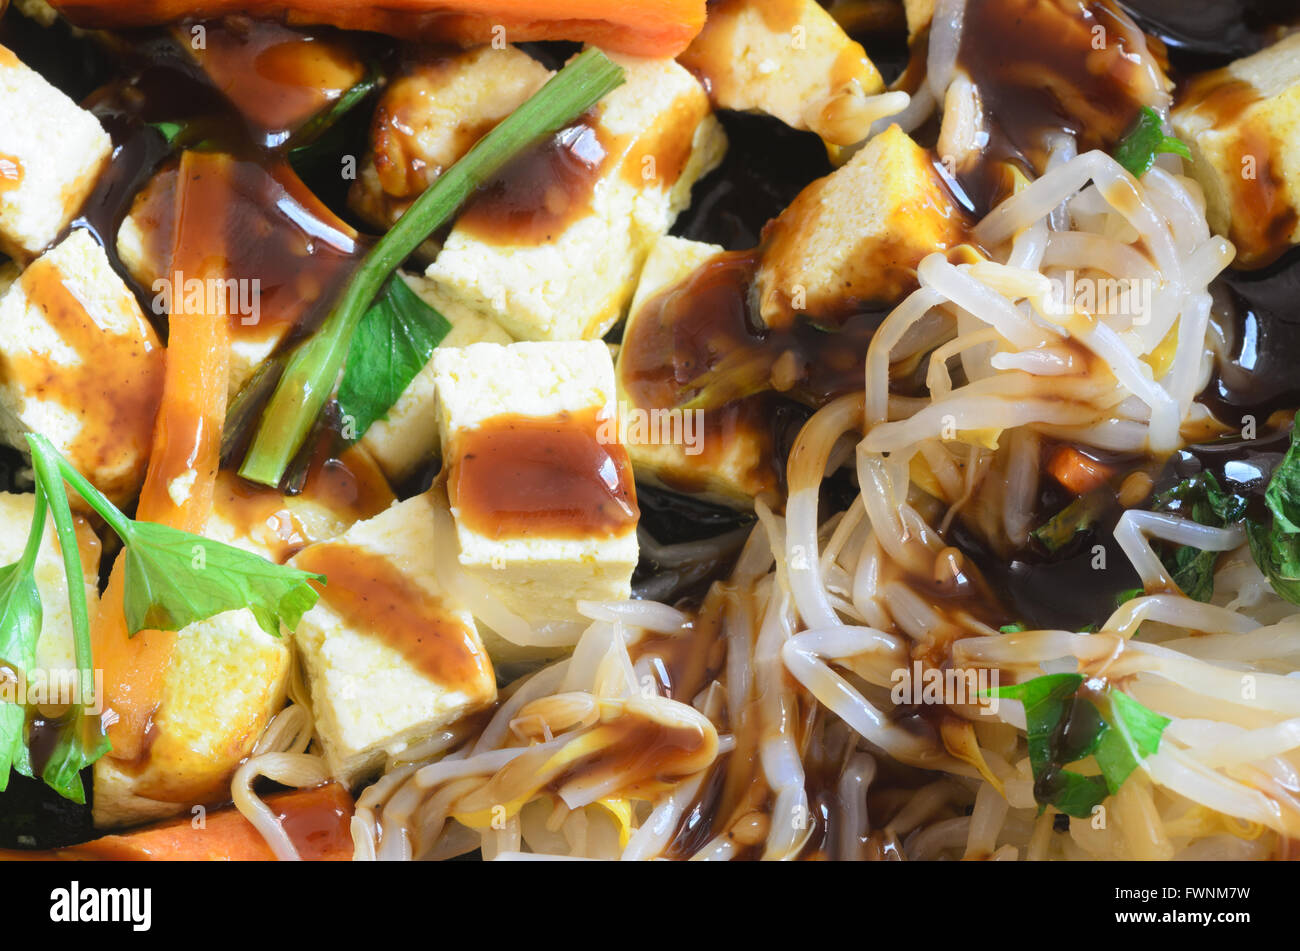 fried tofu with vegetables meal Stock Photo